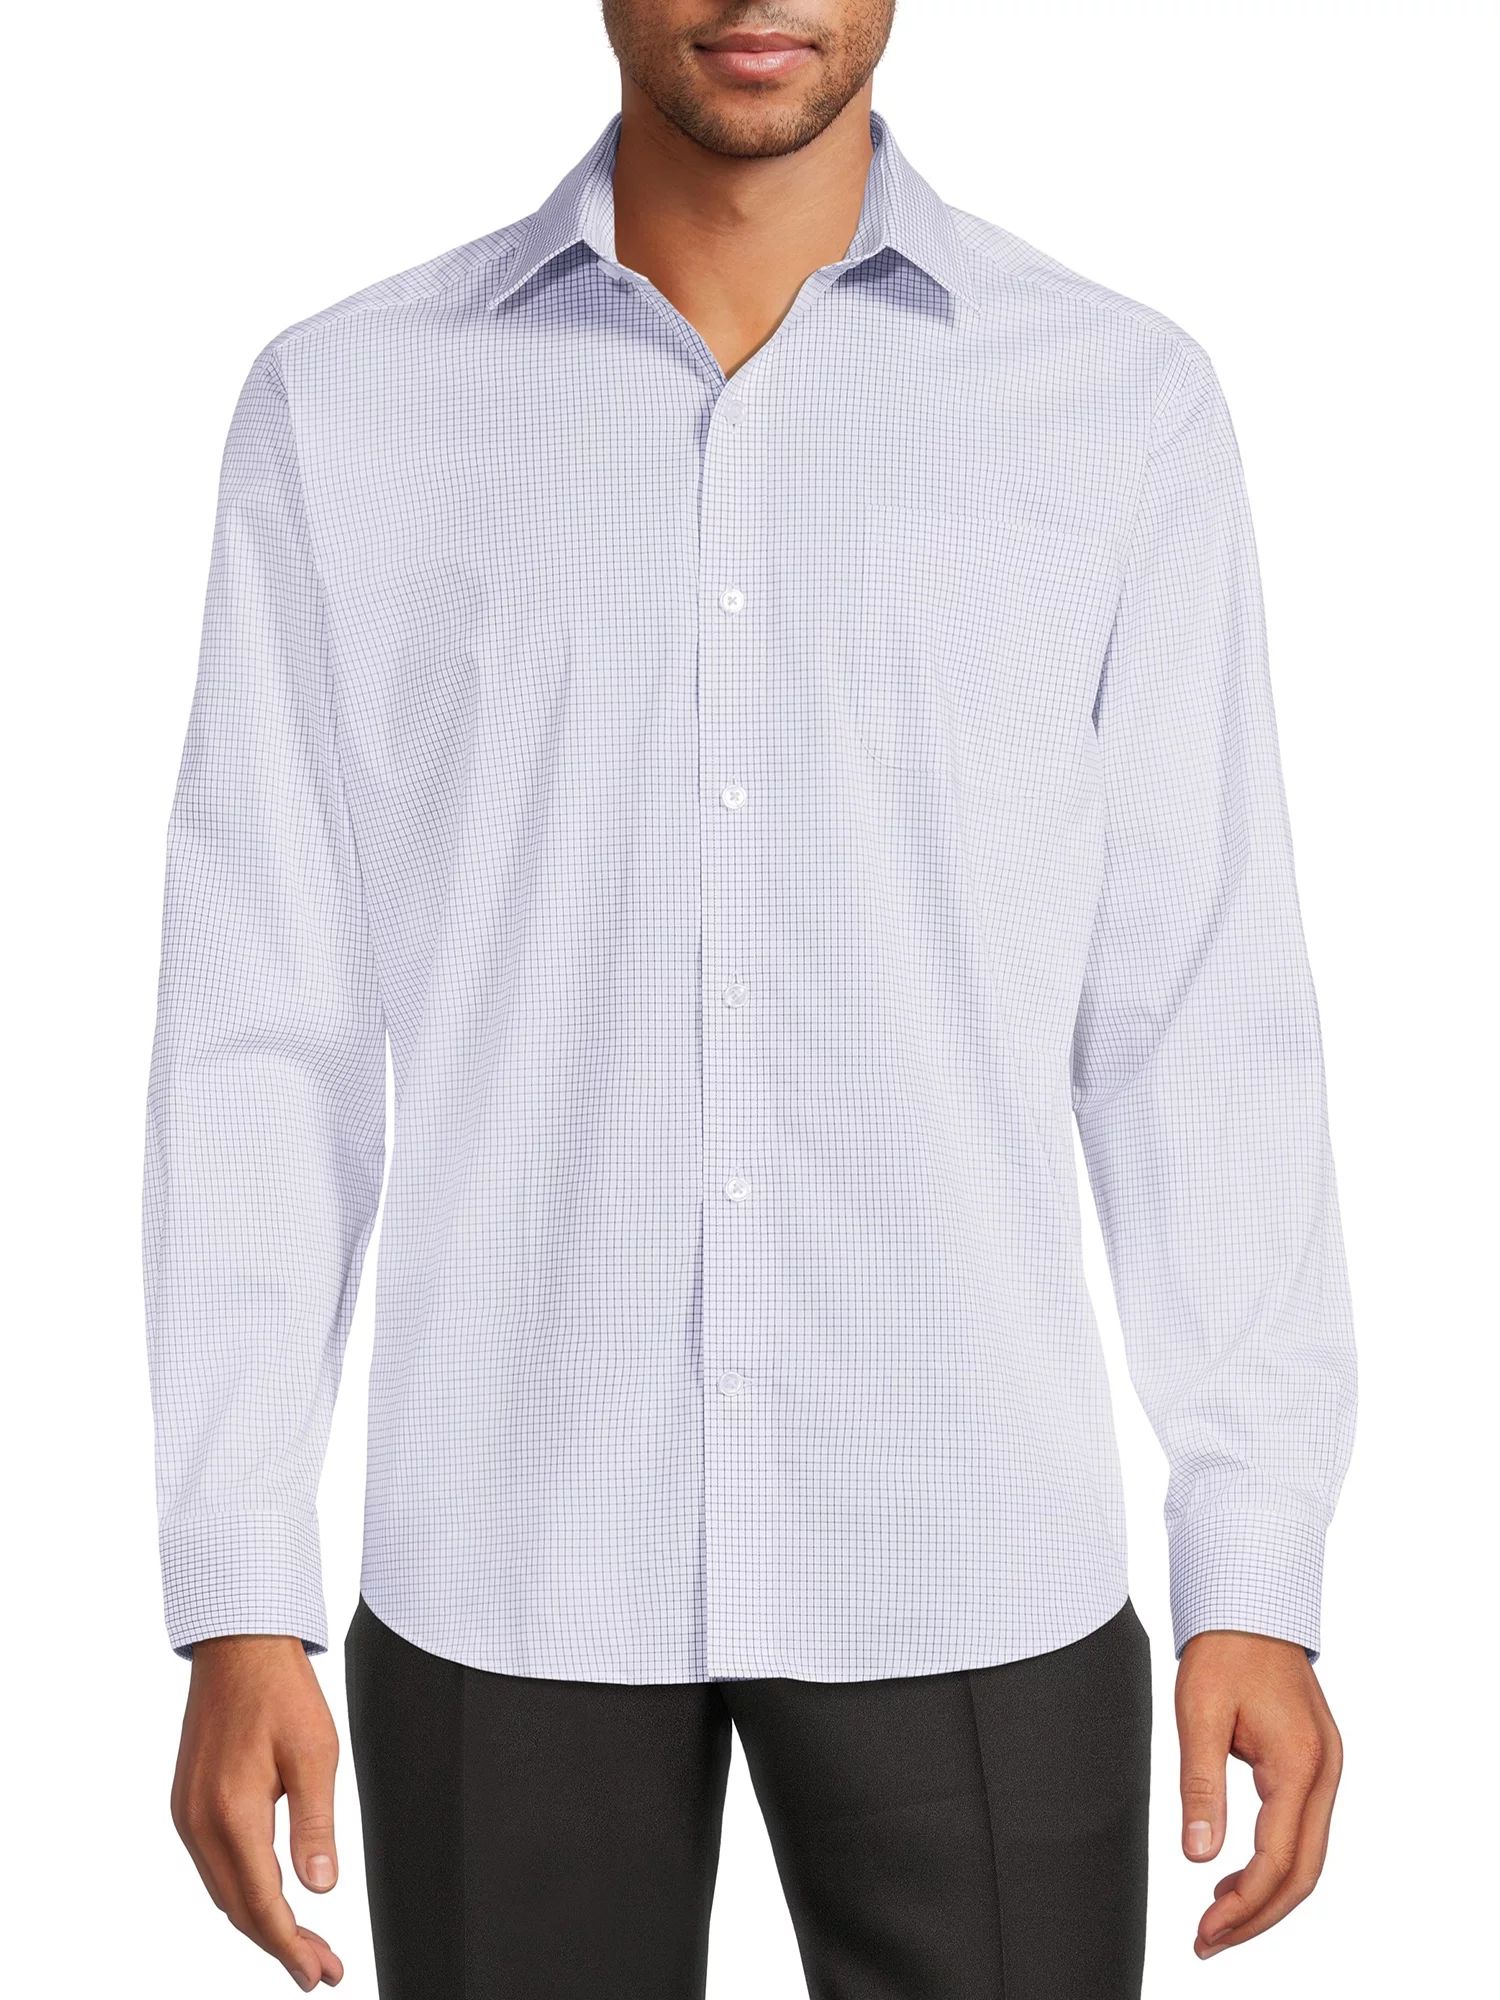 George Men's Classic Dress Shirt with Long Sleeves, Sizes S-3XL | Walmart (US)